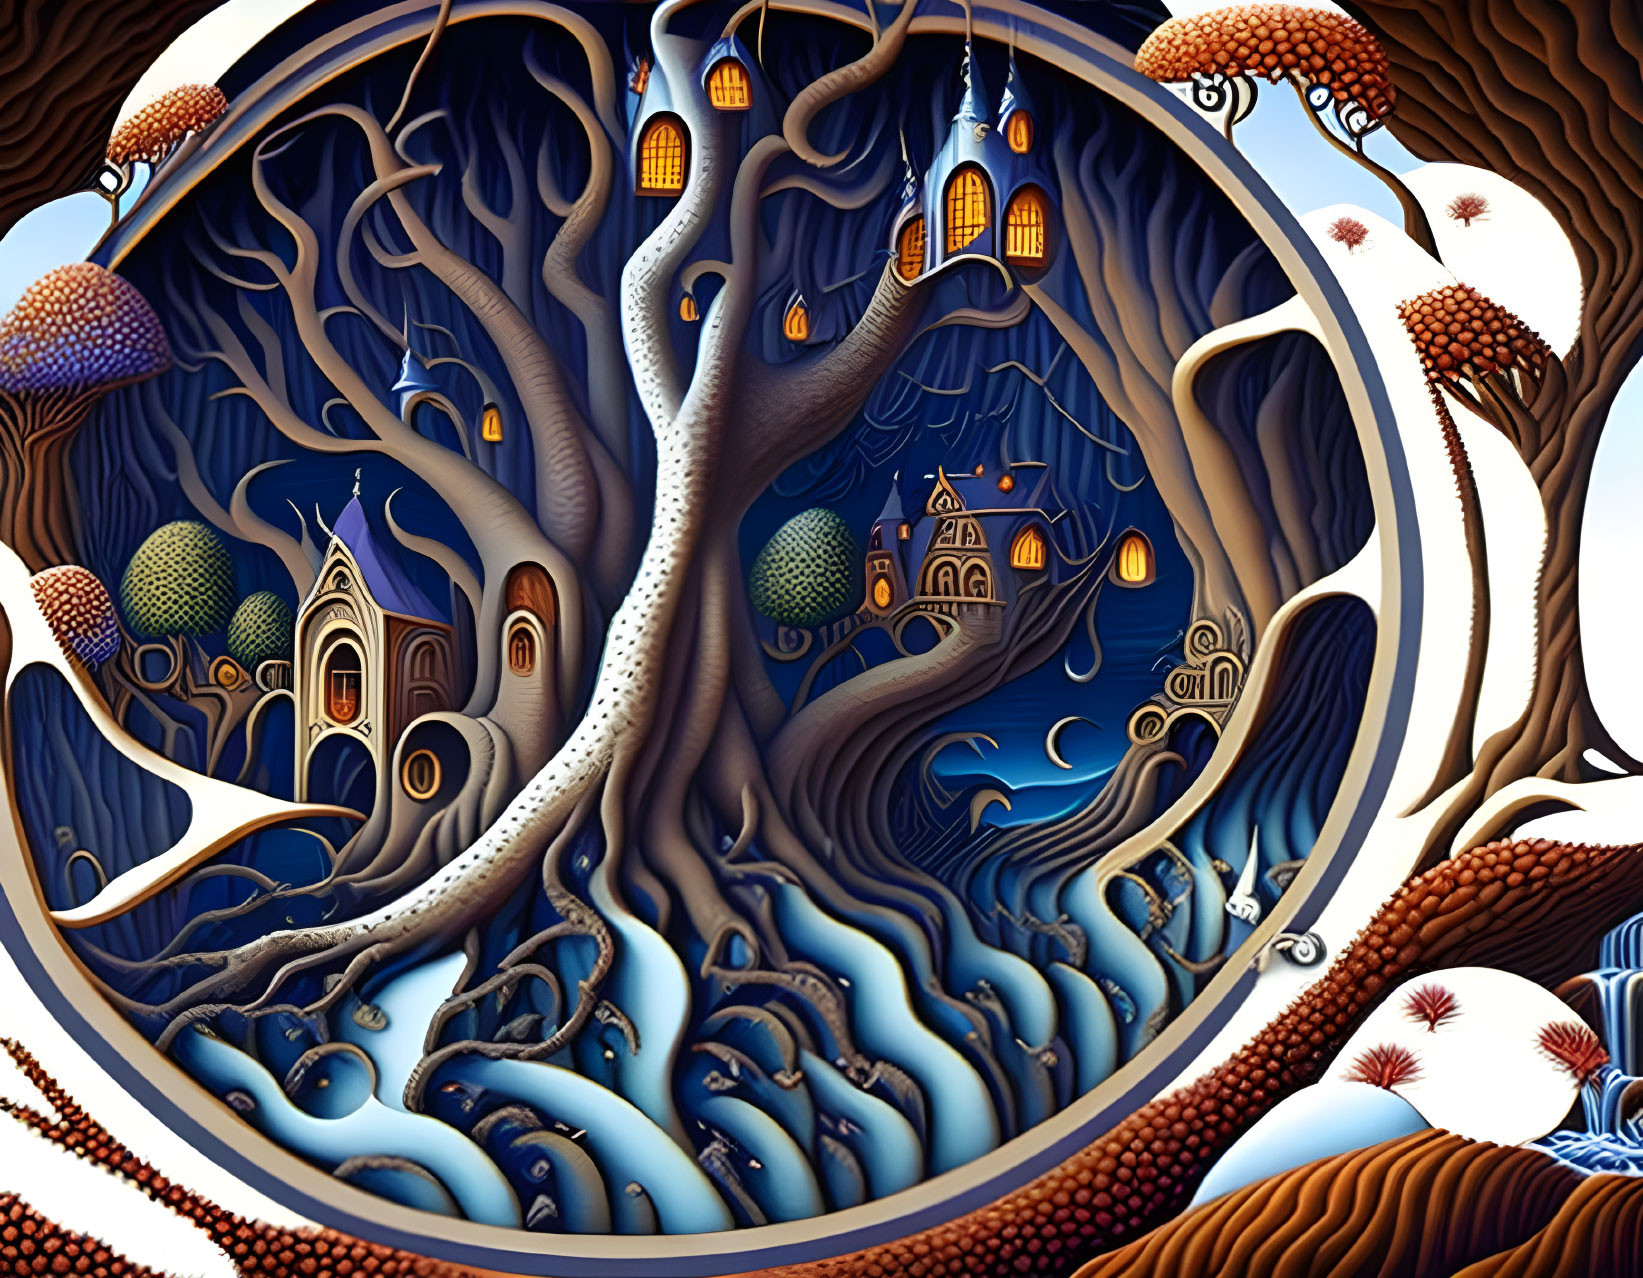 Circular frame artwork showcasing intricate tree roots, branches, fantastical houses, lanterns, and patterned